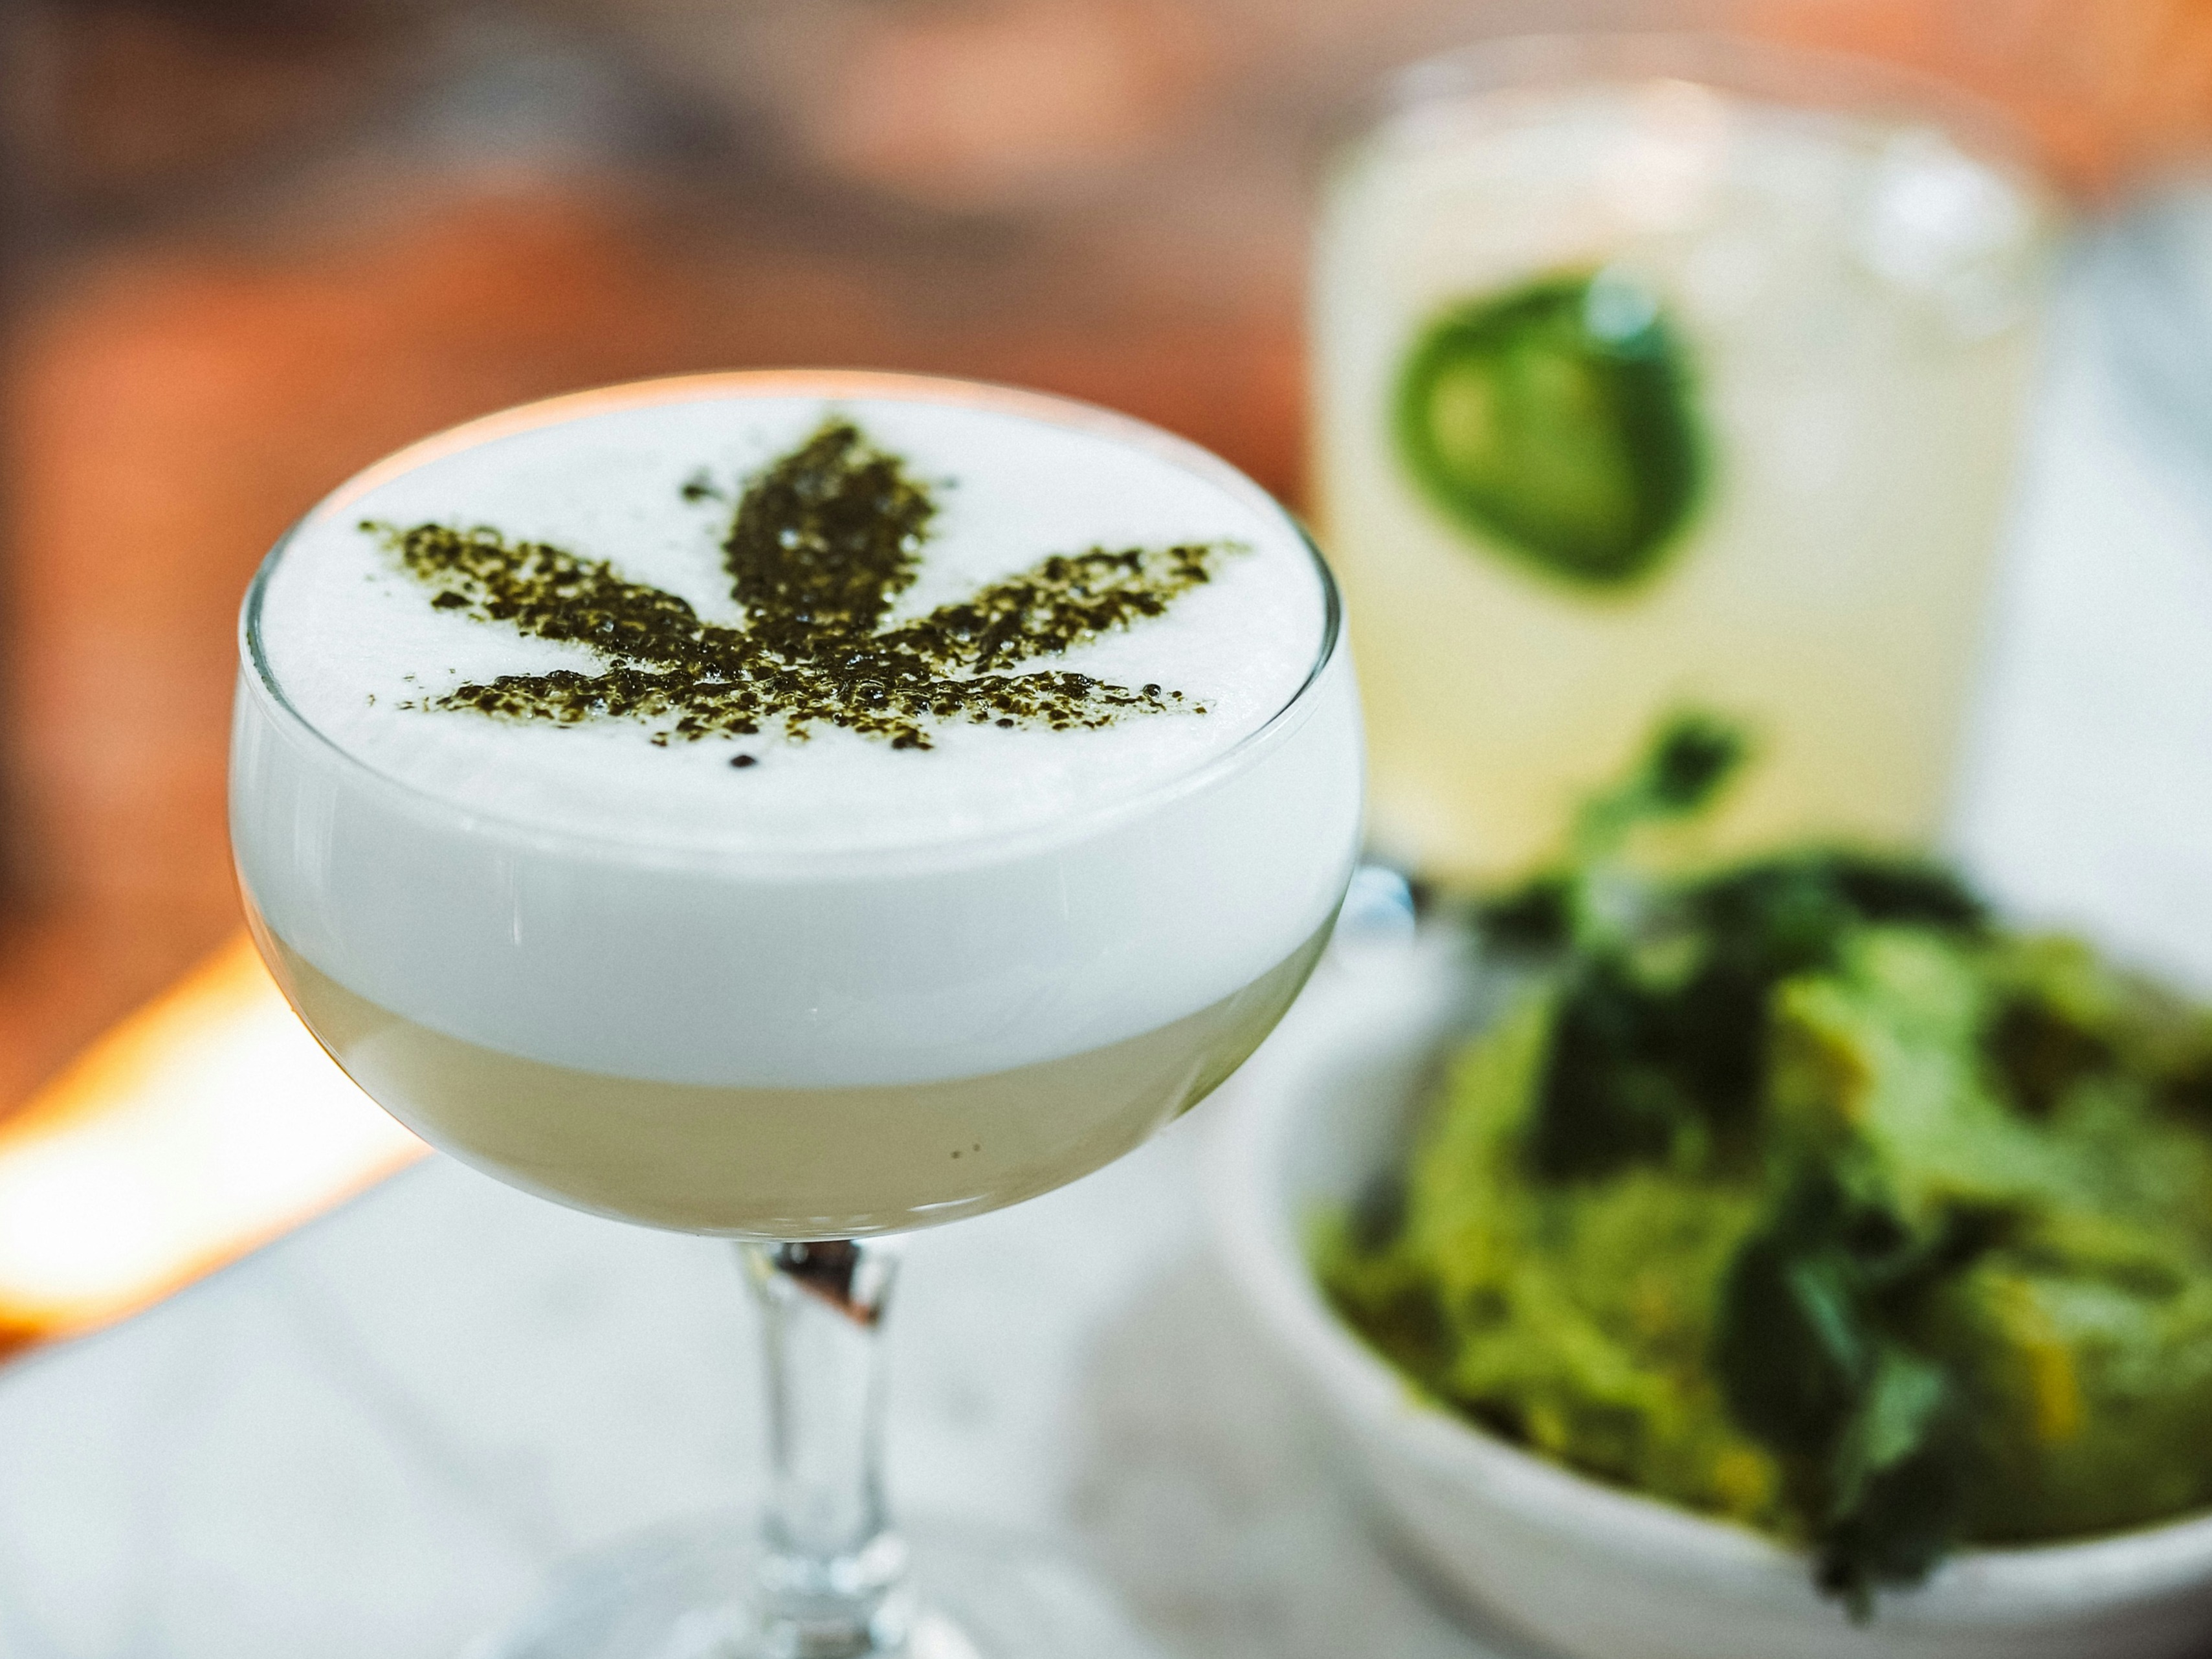 wine glass with cannabis leaf.jpg detail image